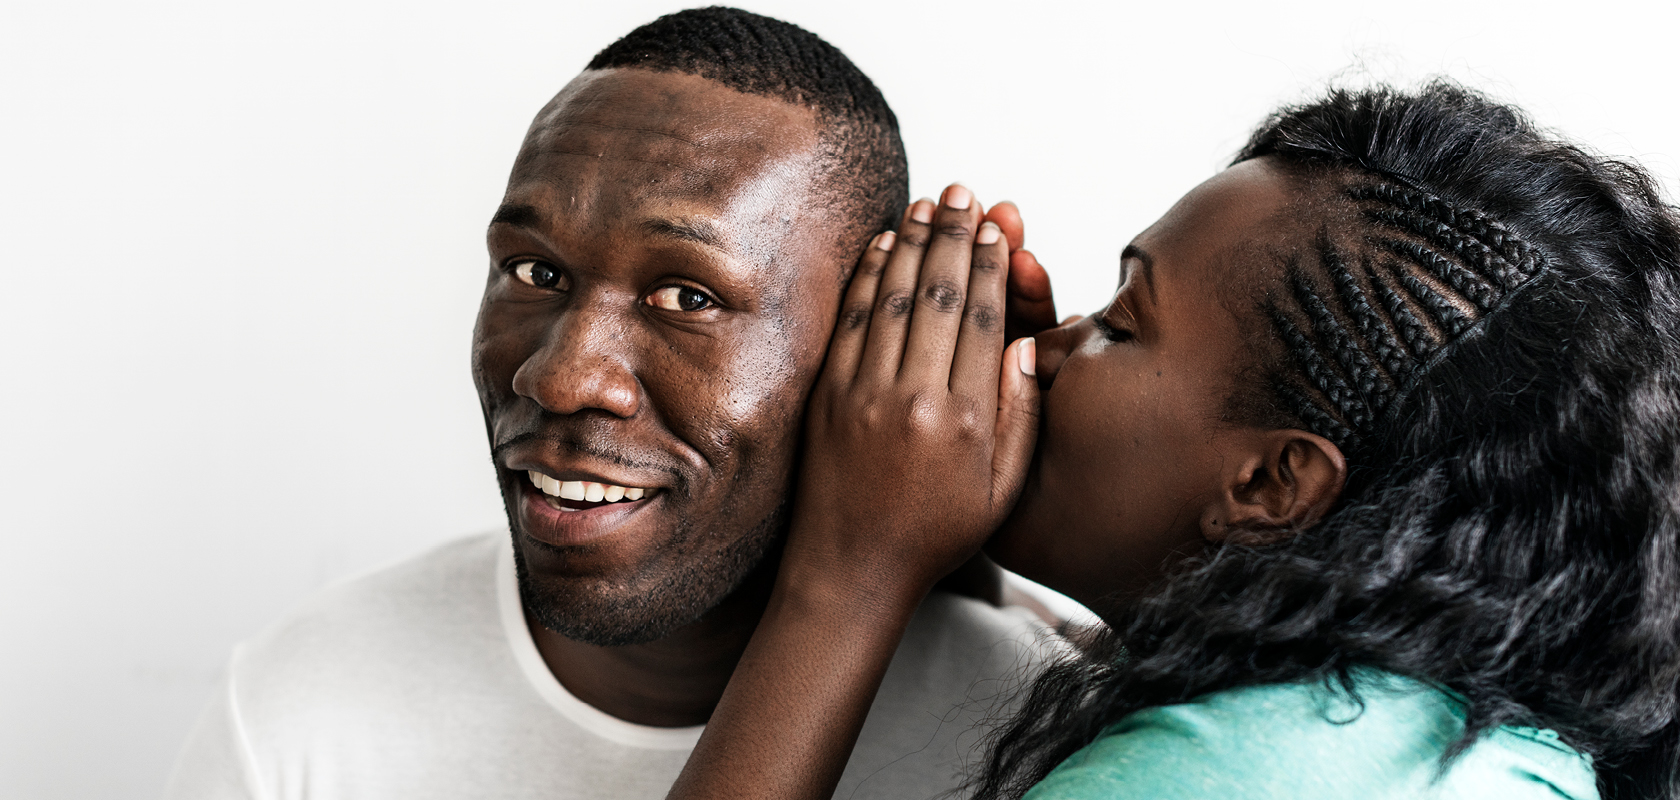 African American woman whispering into smiling African American man's ear